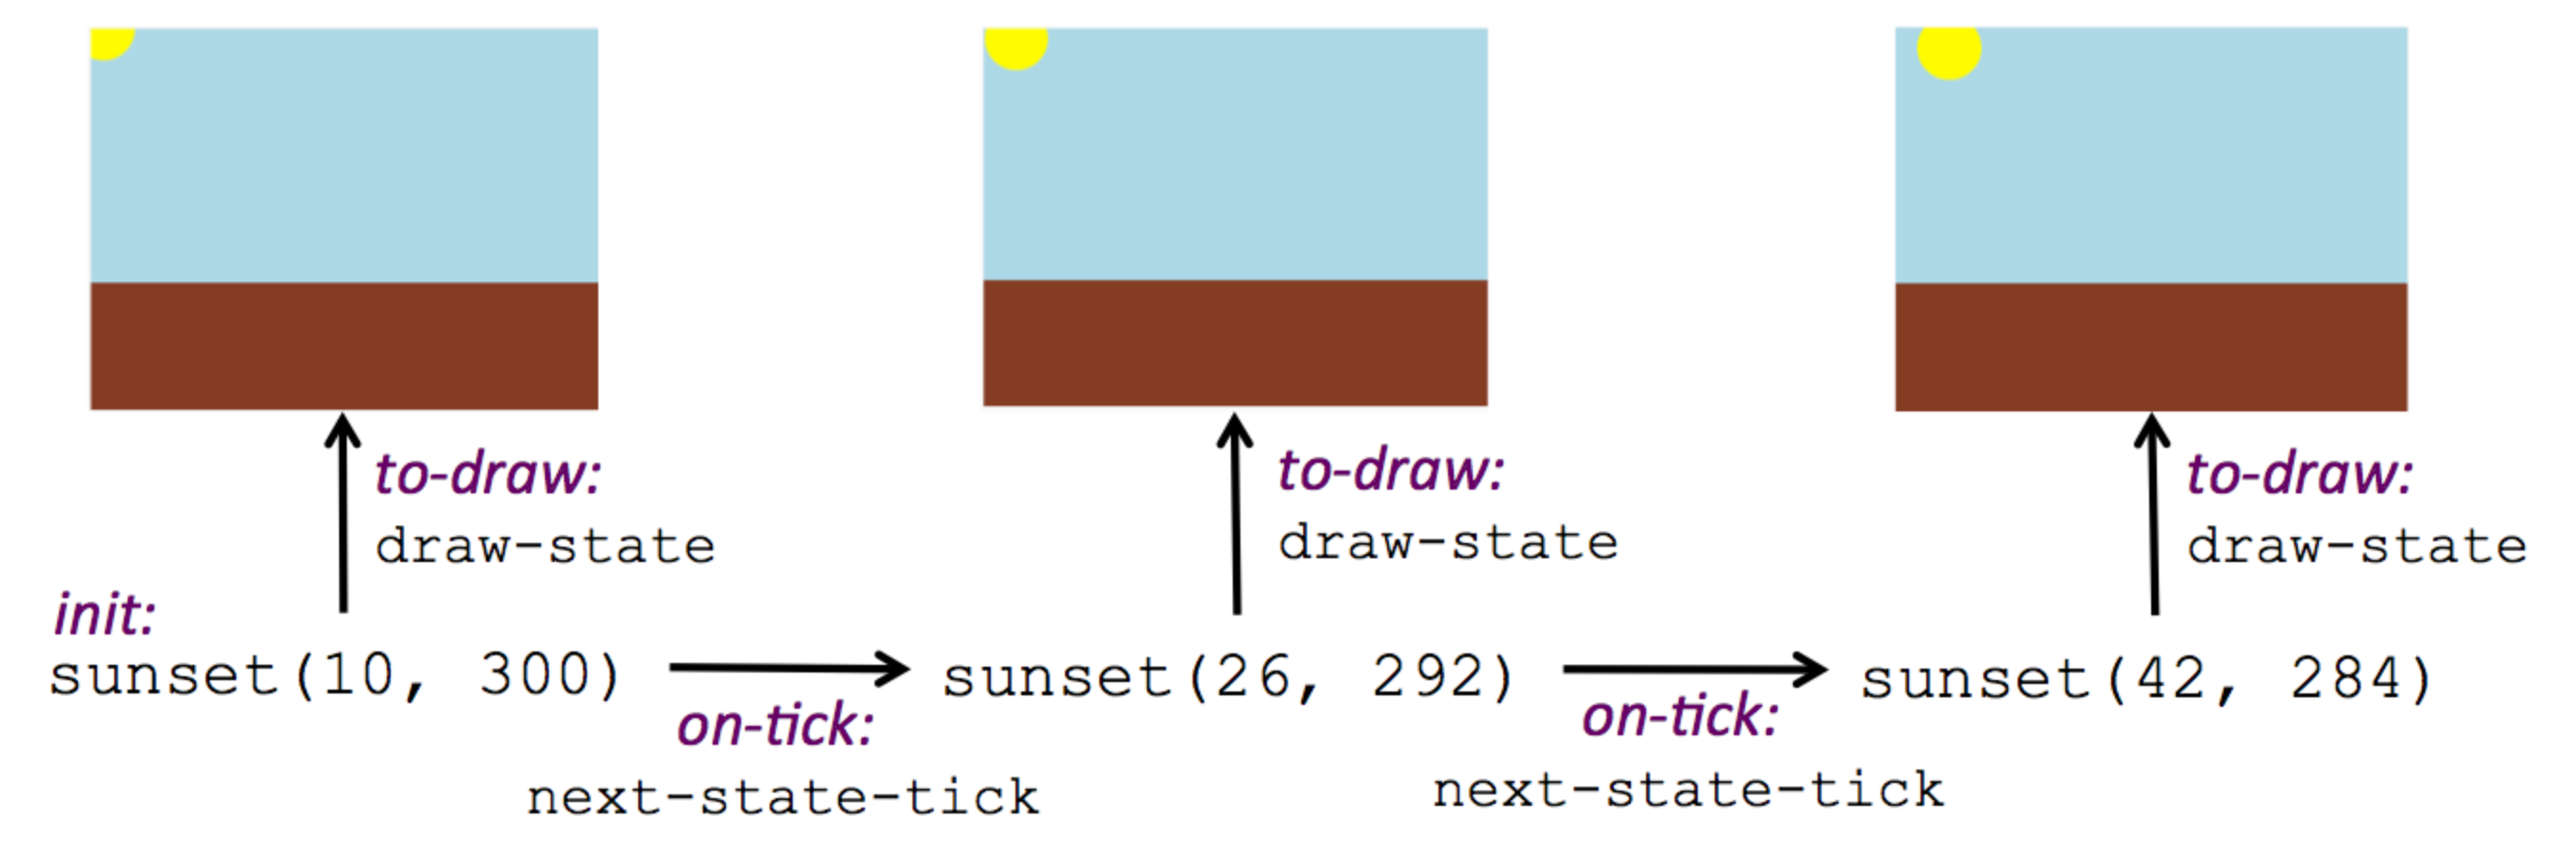 Three frames of the sunset animation, side by side with the data structure for each underneath. The structures all have two fields: the x and y coordinate of the sun. In each frame of the animation the x and y get slightly bigger, and the corresponding frame shows the sun inching down and to the right. After each frame, the on-tick event fires, the next-state-tick function updates the data structure accordingly, the to-draw event fires and the draw-state function generates the next frame.